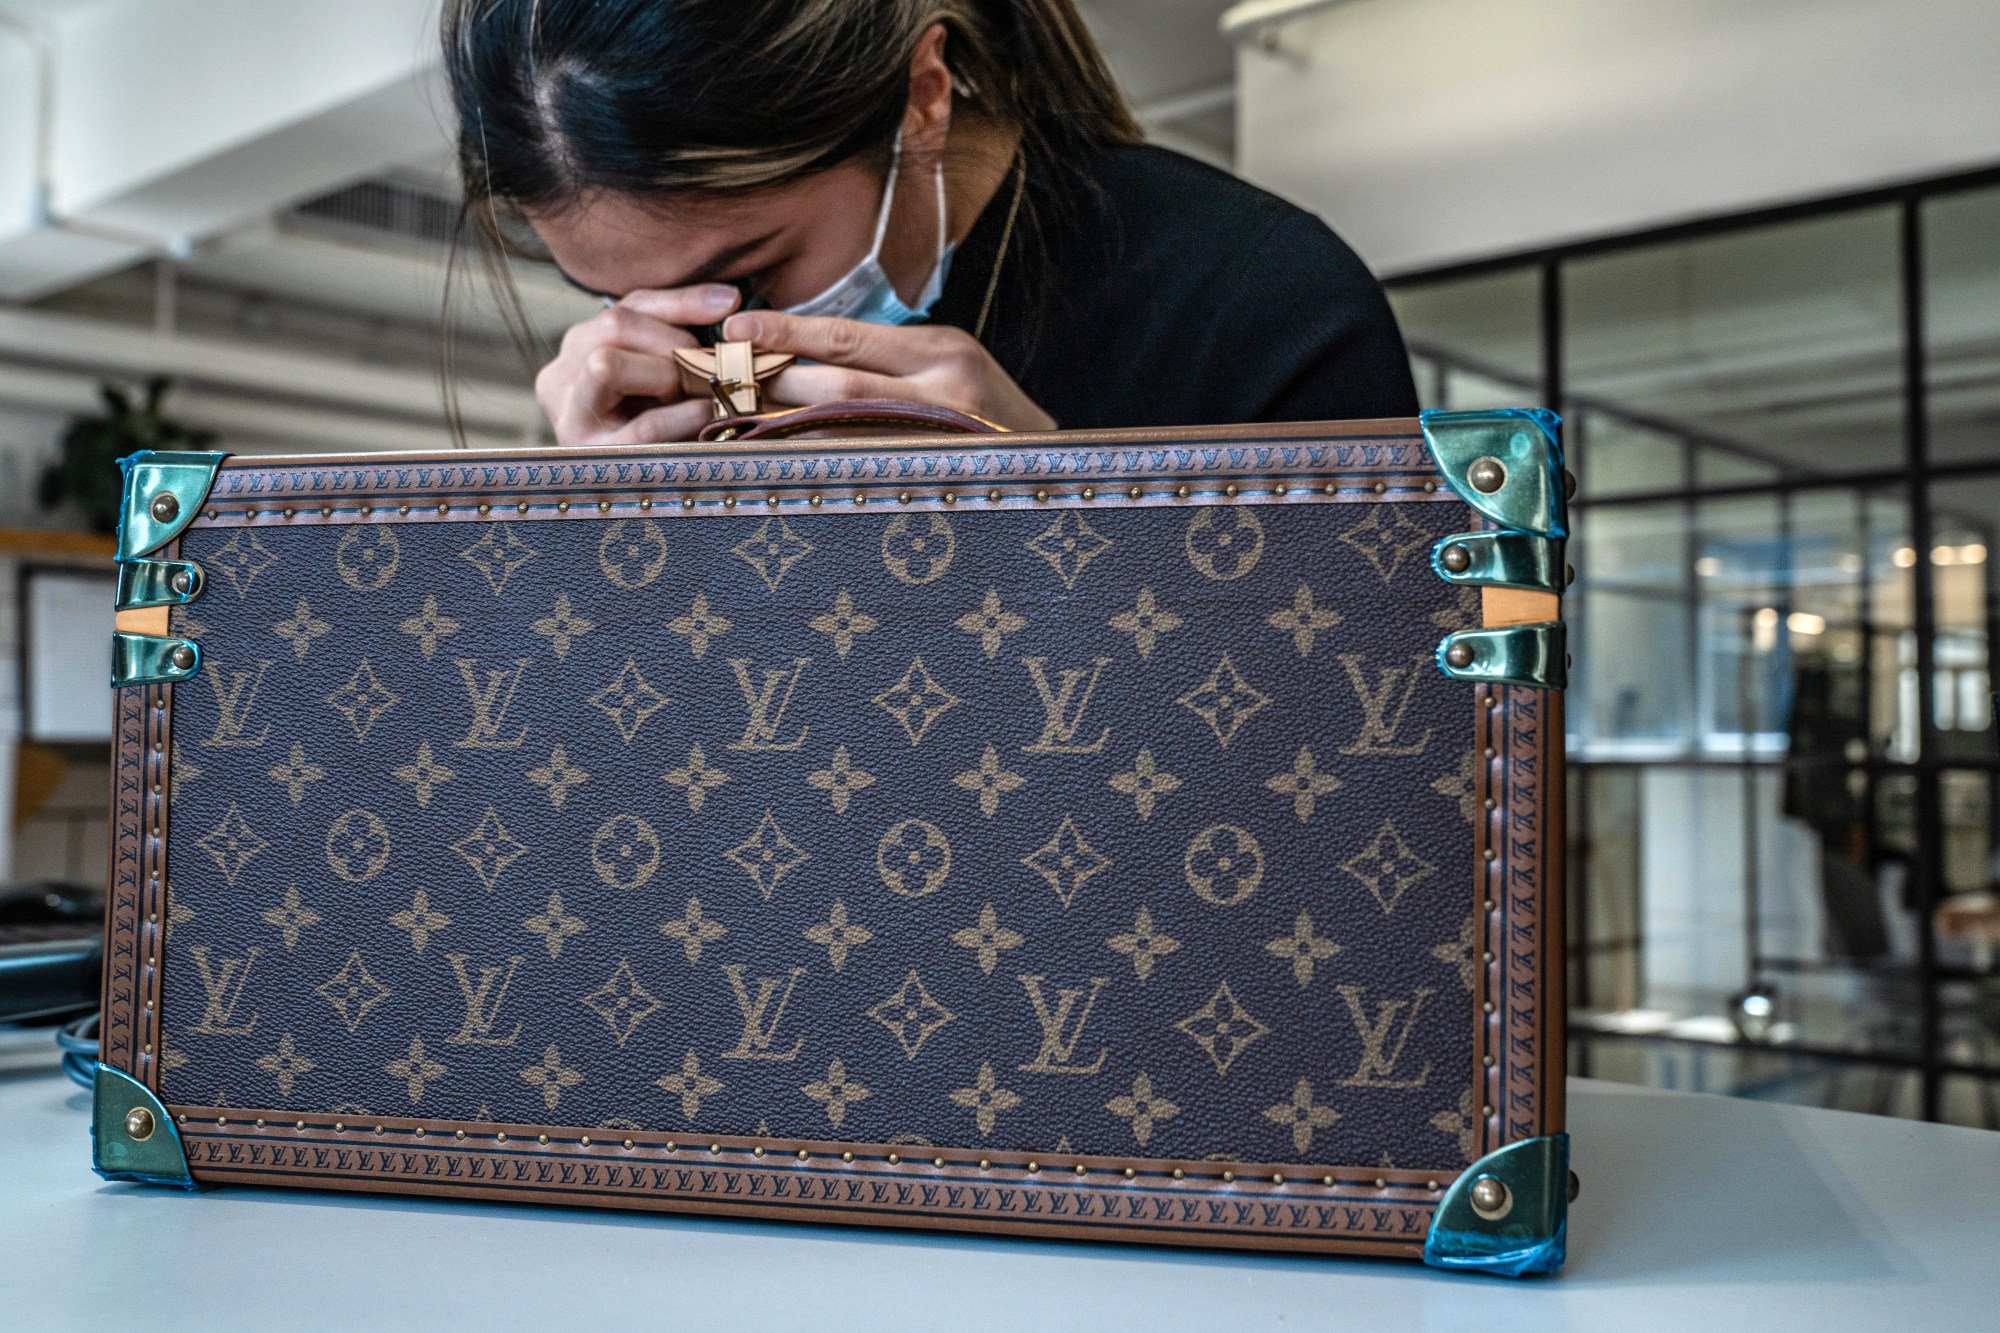 Louis Vuitton and Chanel dominate China's luxury social space